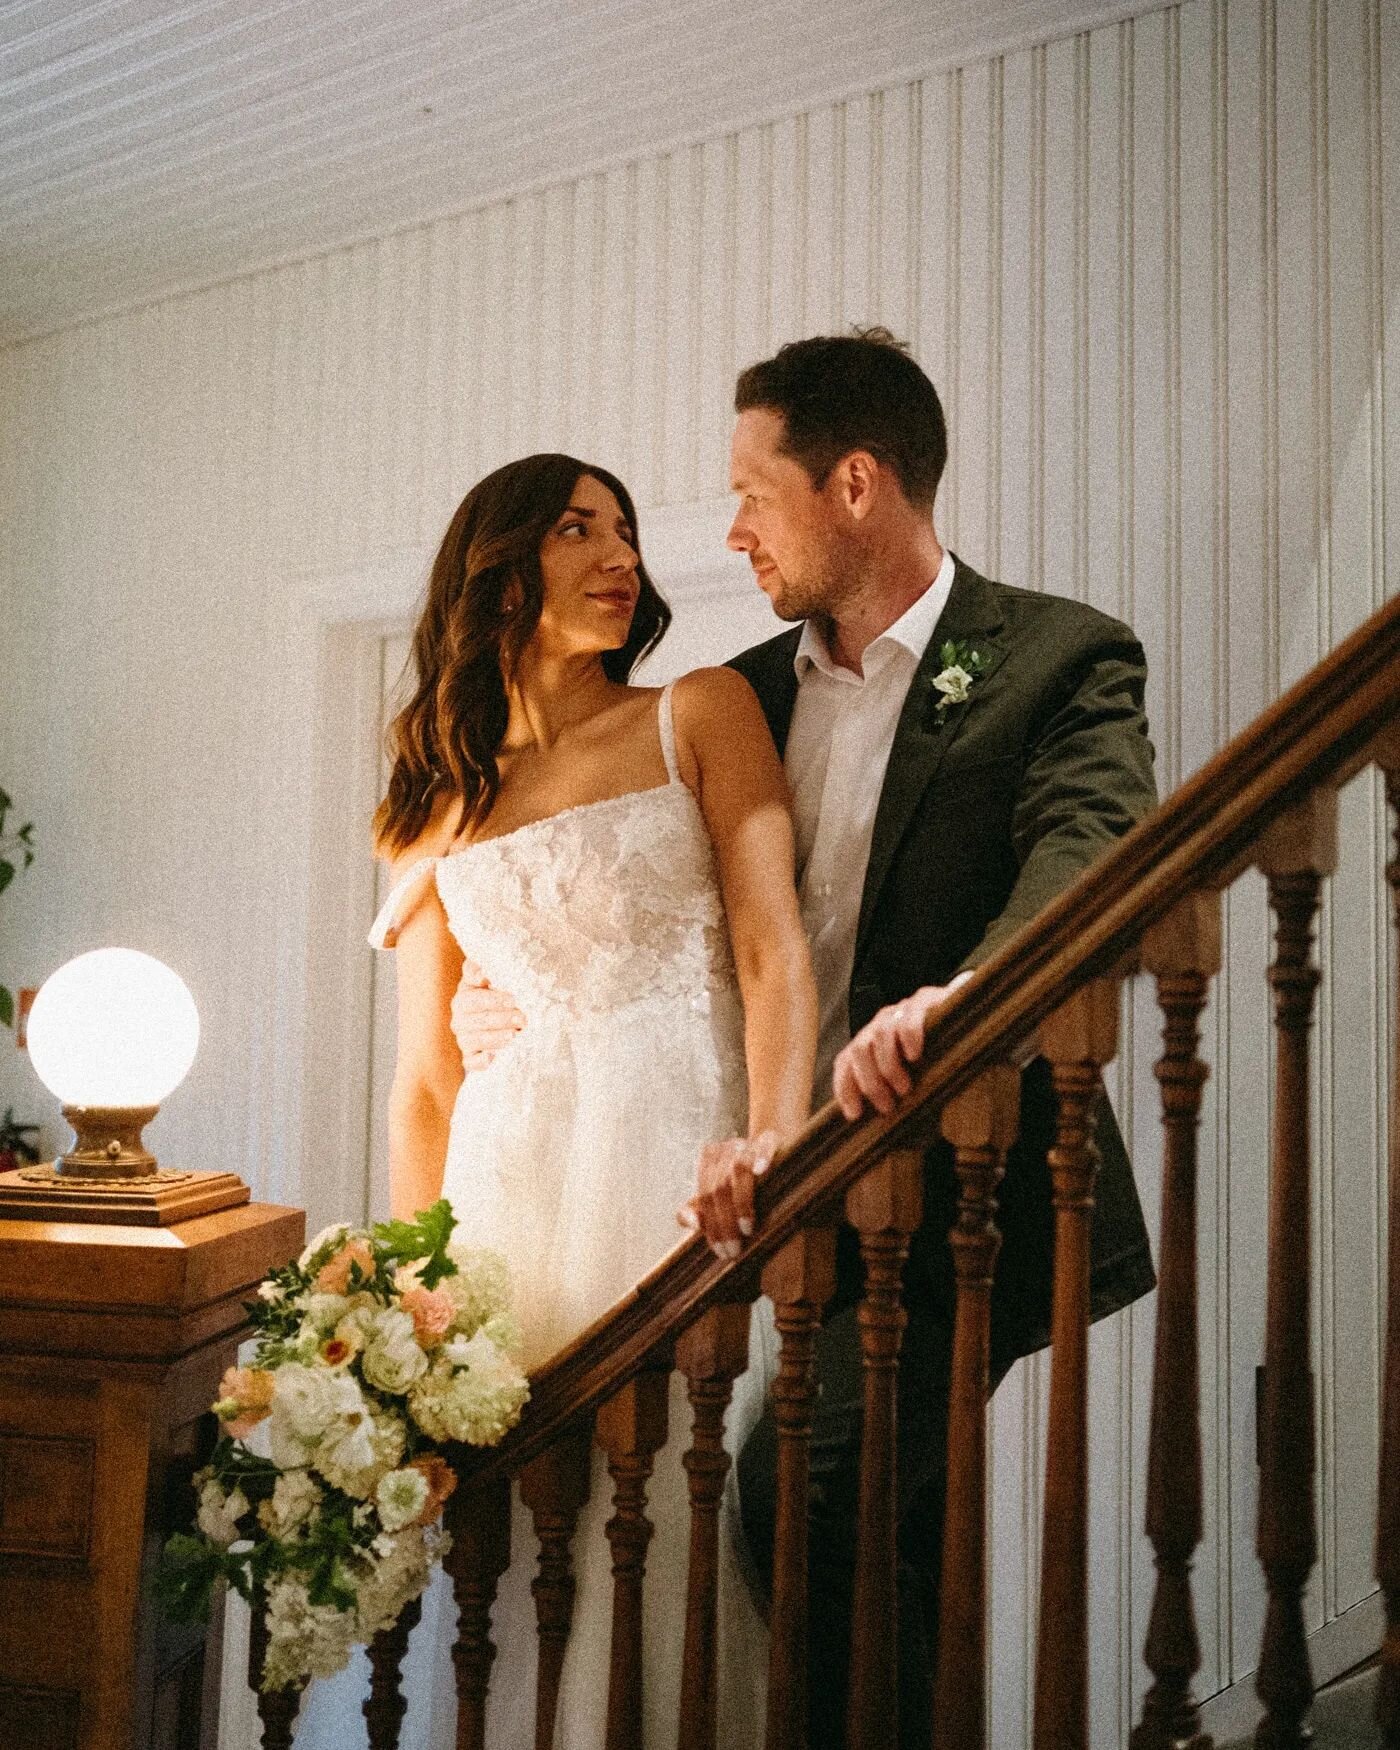 INTIMATE. JOYFUL. AND LOVE ABOUNDING. 

That's what M&amp;A's day felt like- throughout our discussions I knew that they wanted a day focused on their love and spending as much time as possible with each other and their guests. So of course that's wh